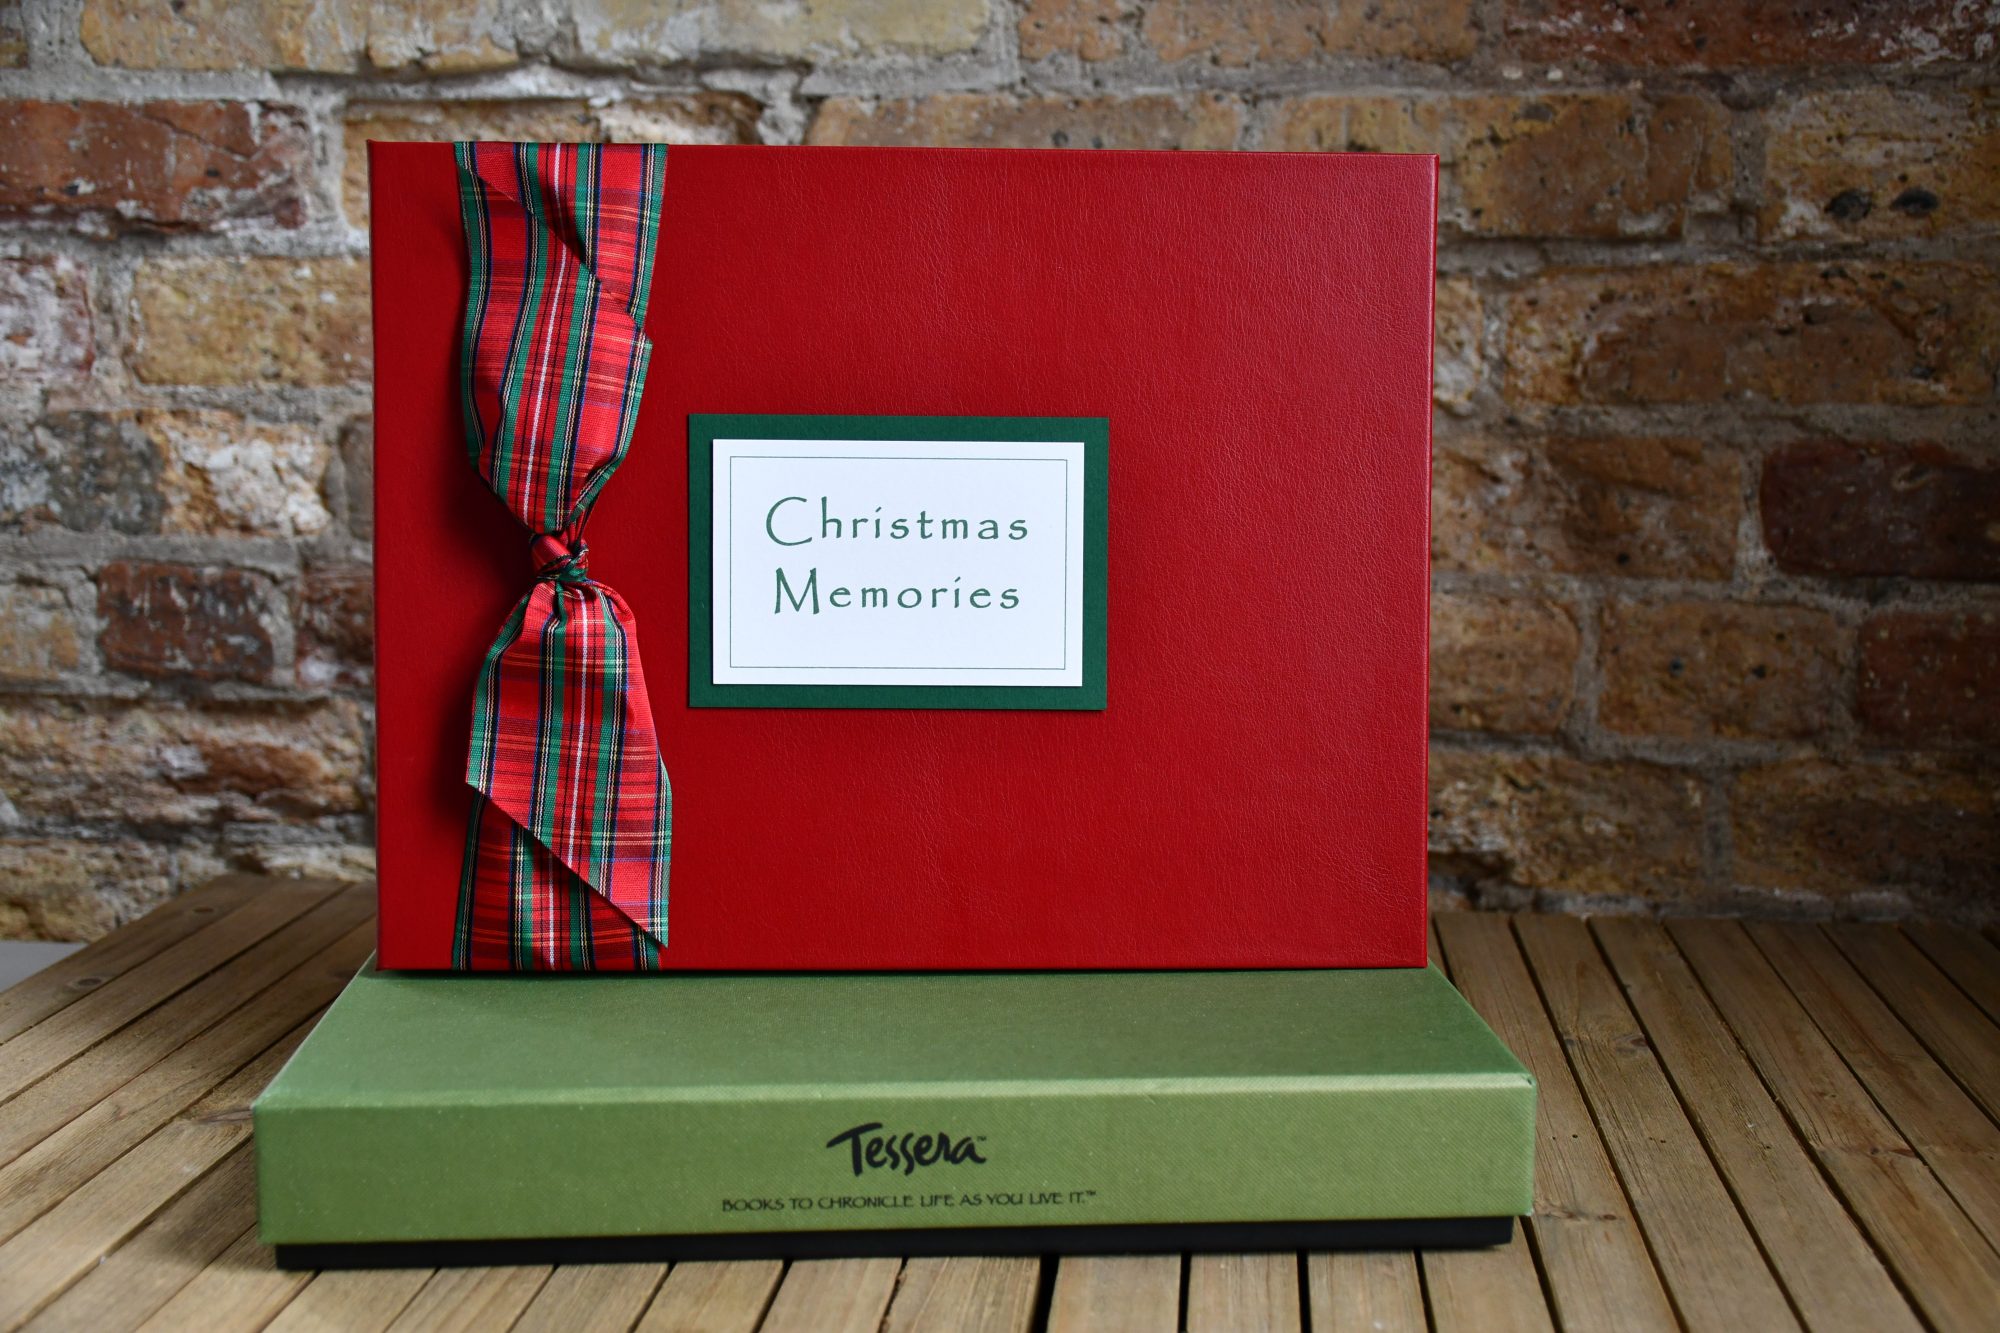 Christmas Memories Book with plaid ribbon bow and plaque on top of tessera green gift box